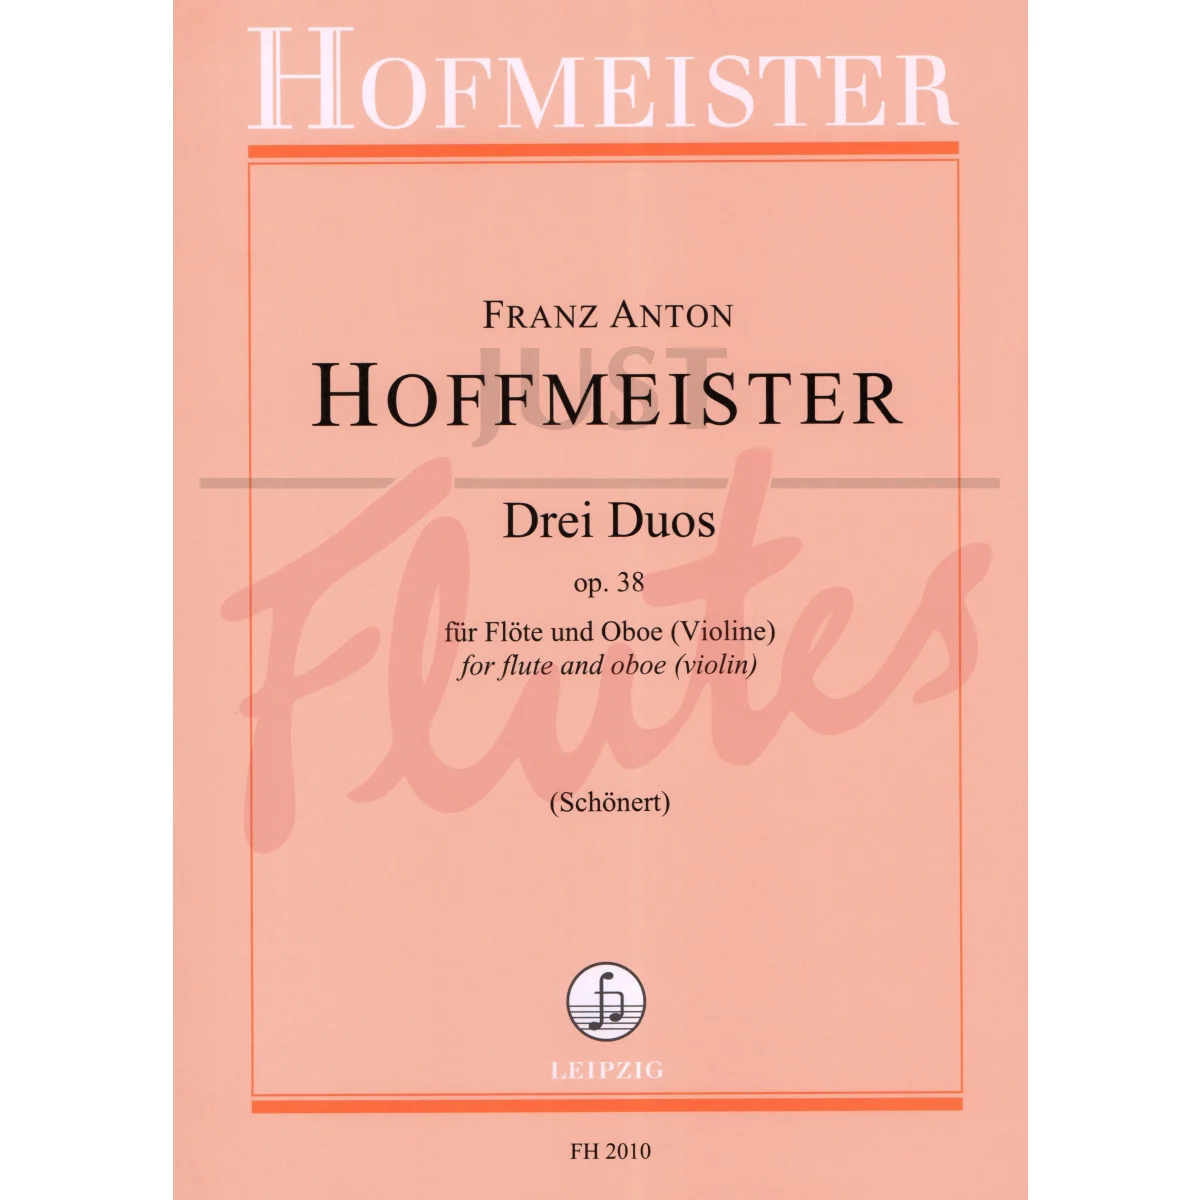 Three Duos for Flute and Oboe